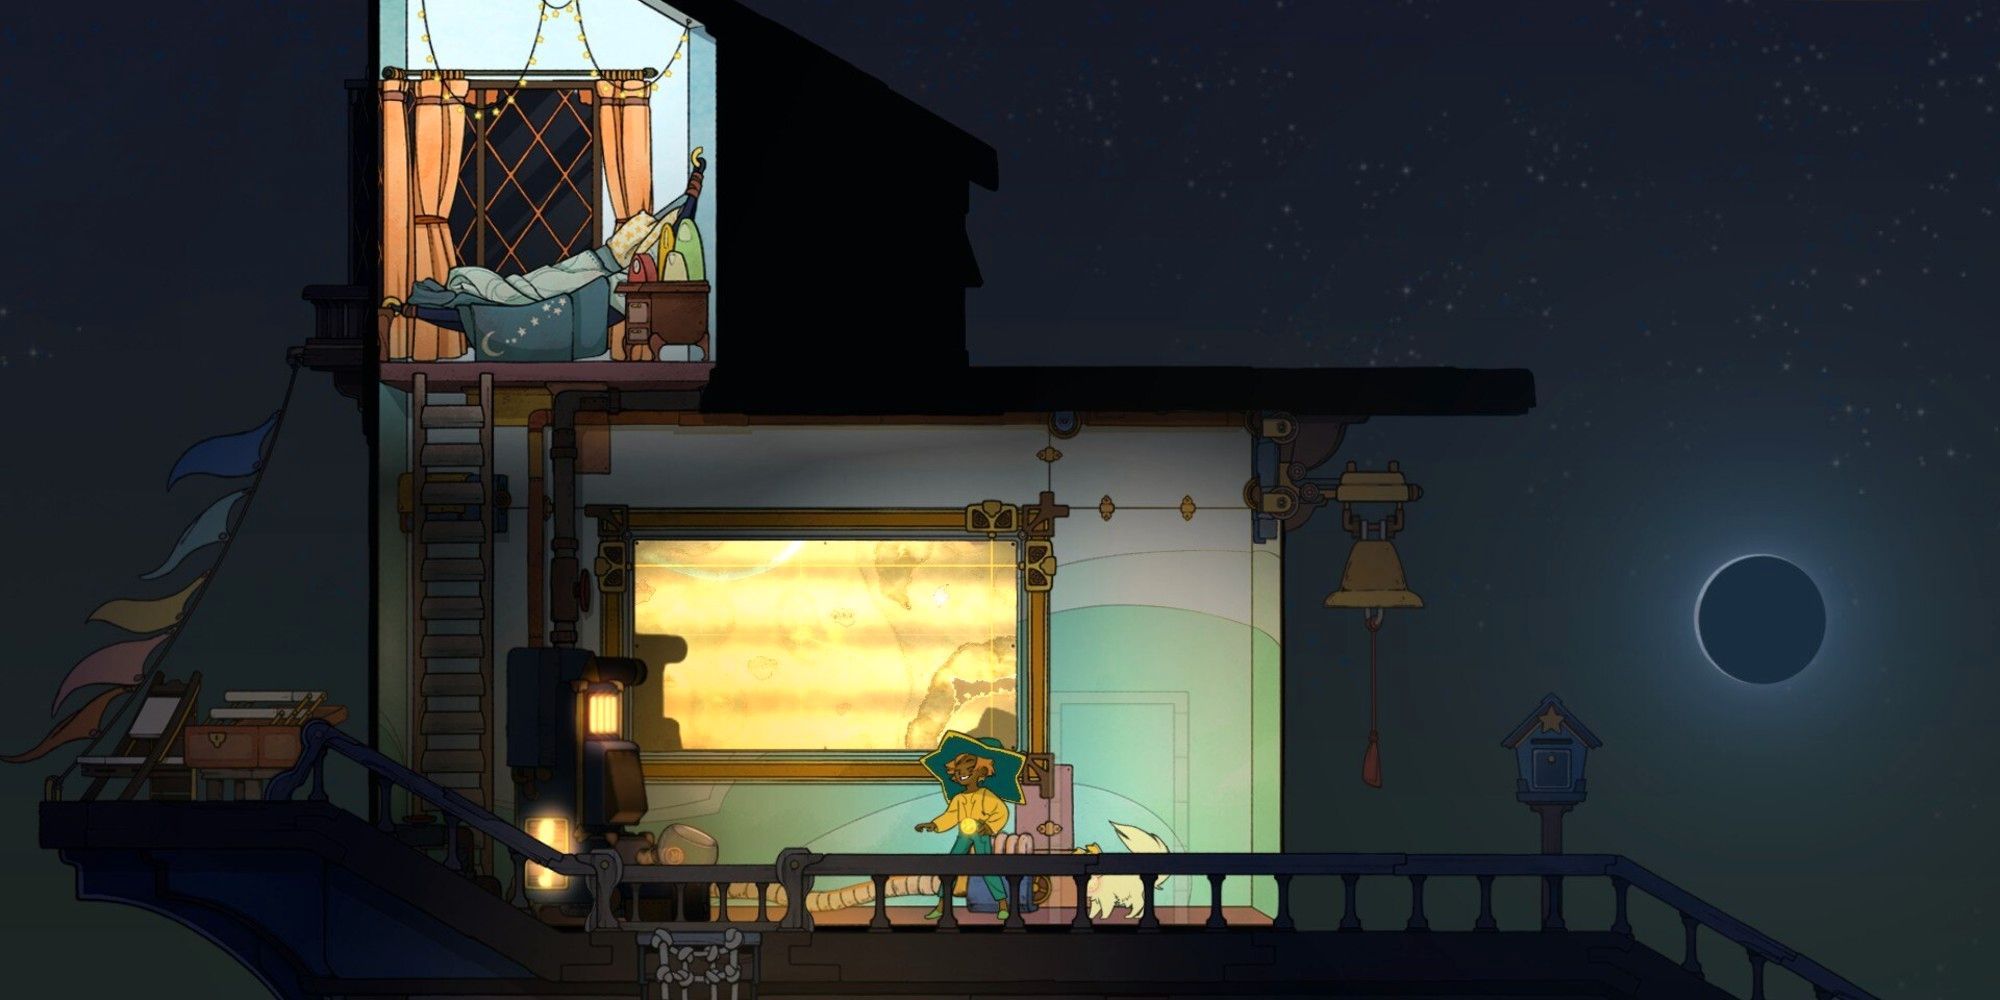 Stella and her pet standing in the cabin at night in Spiritfarer